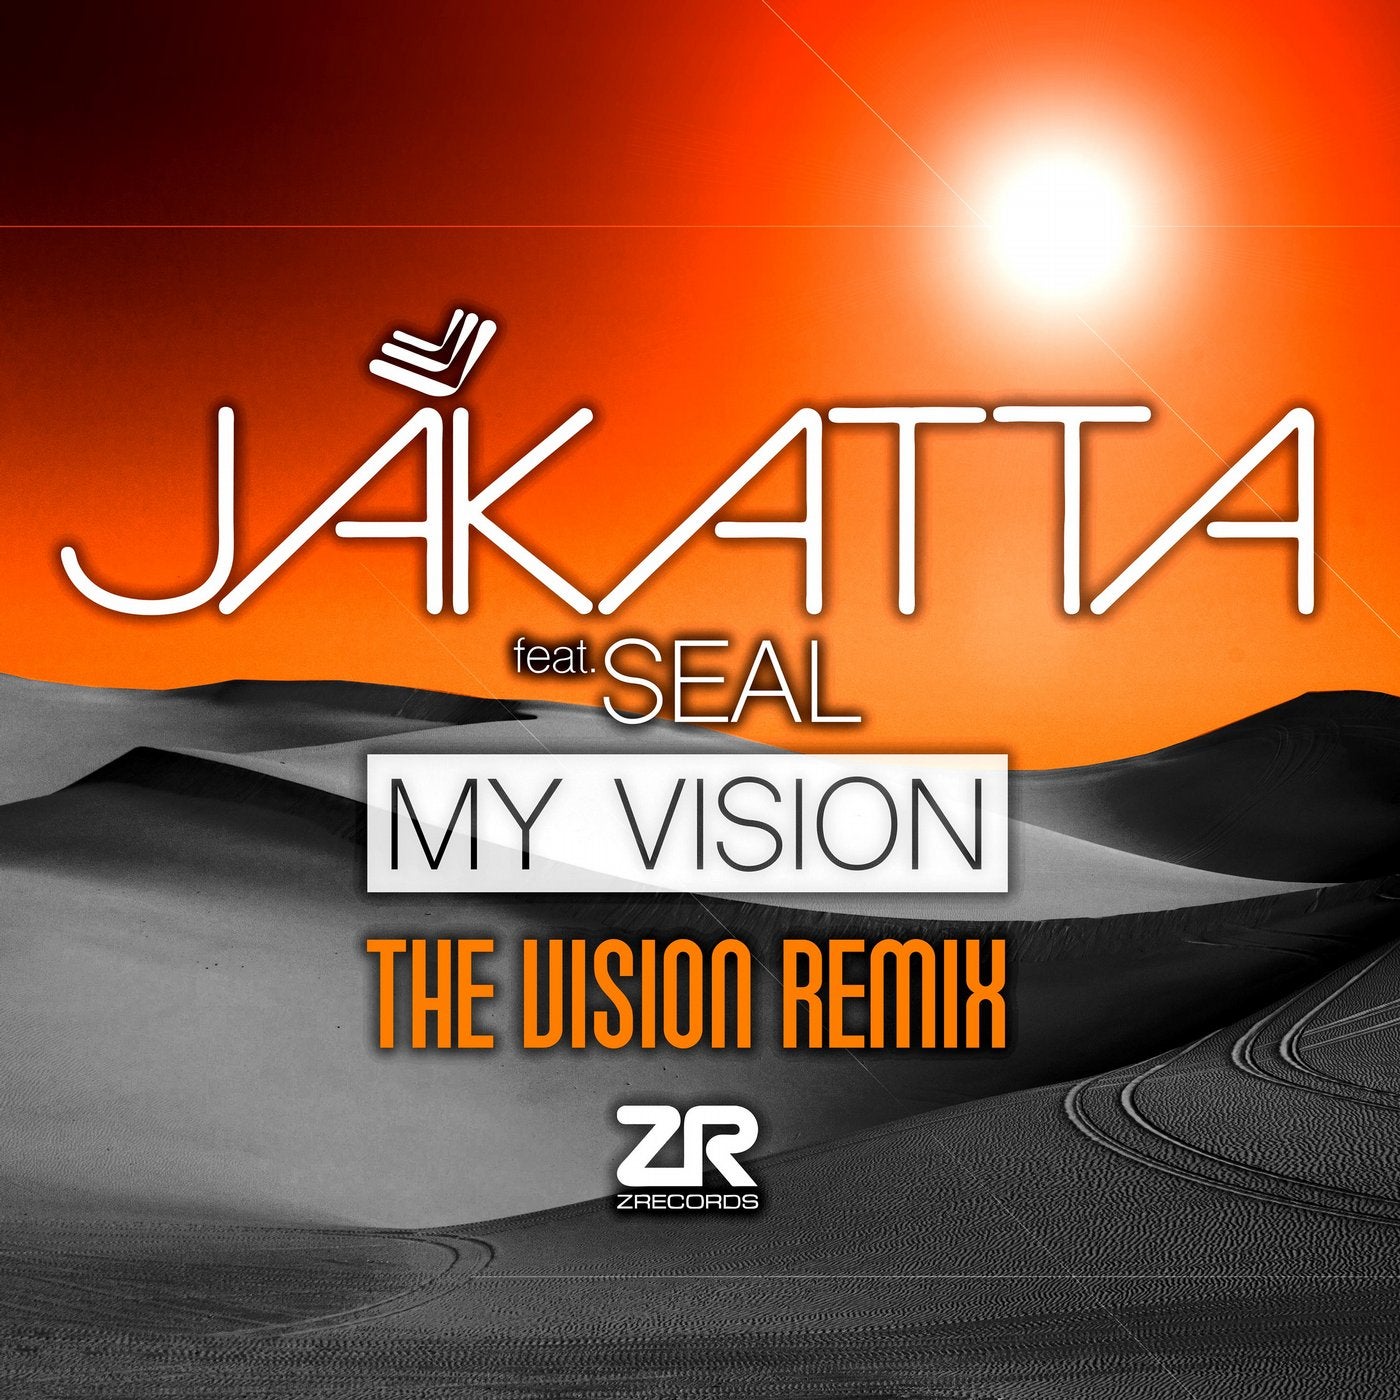 Jakatta Feat. Seal - My Vision (The Vision Remix)